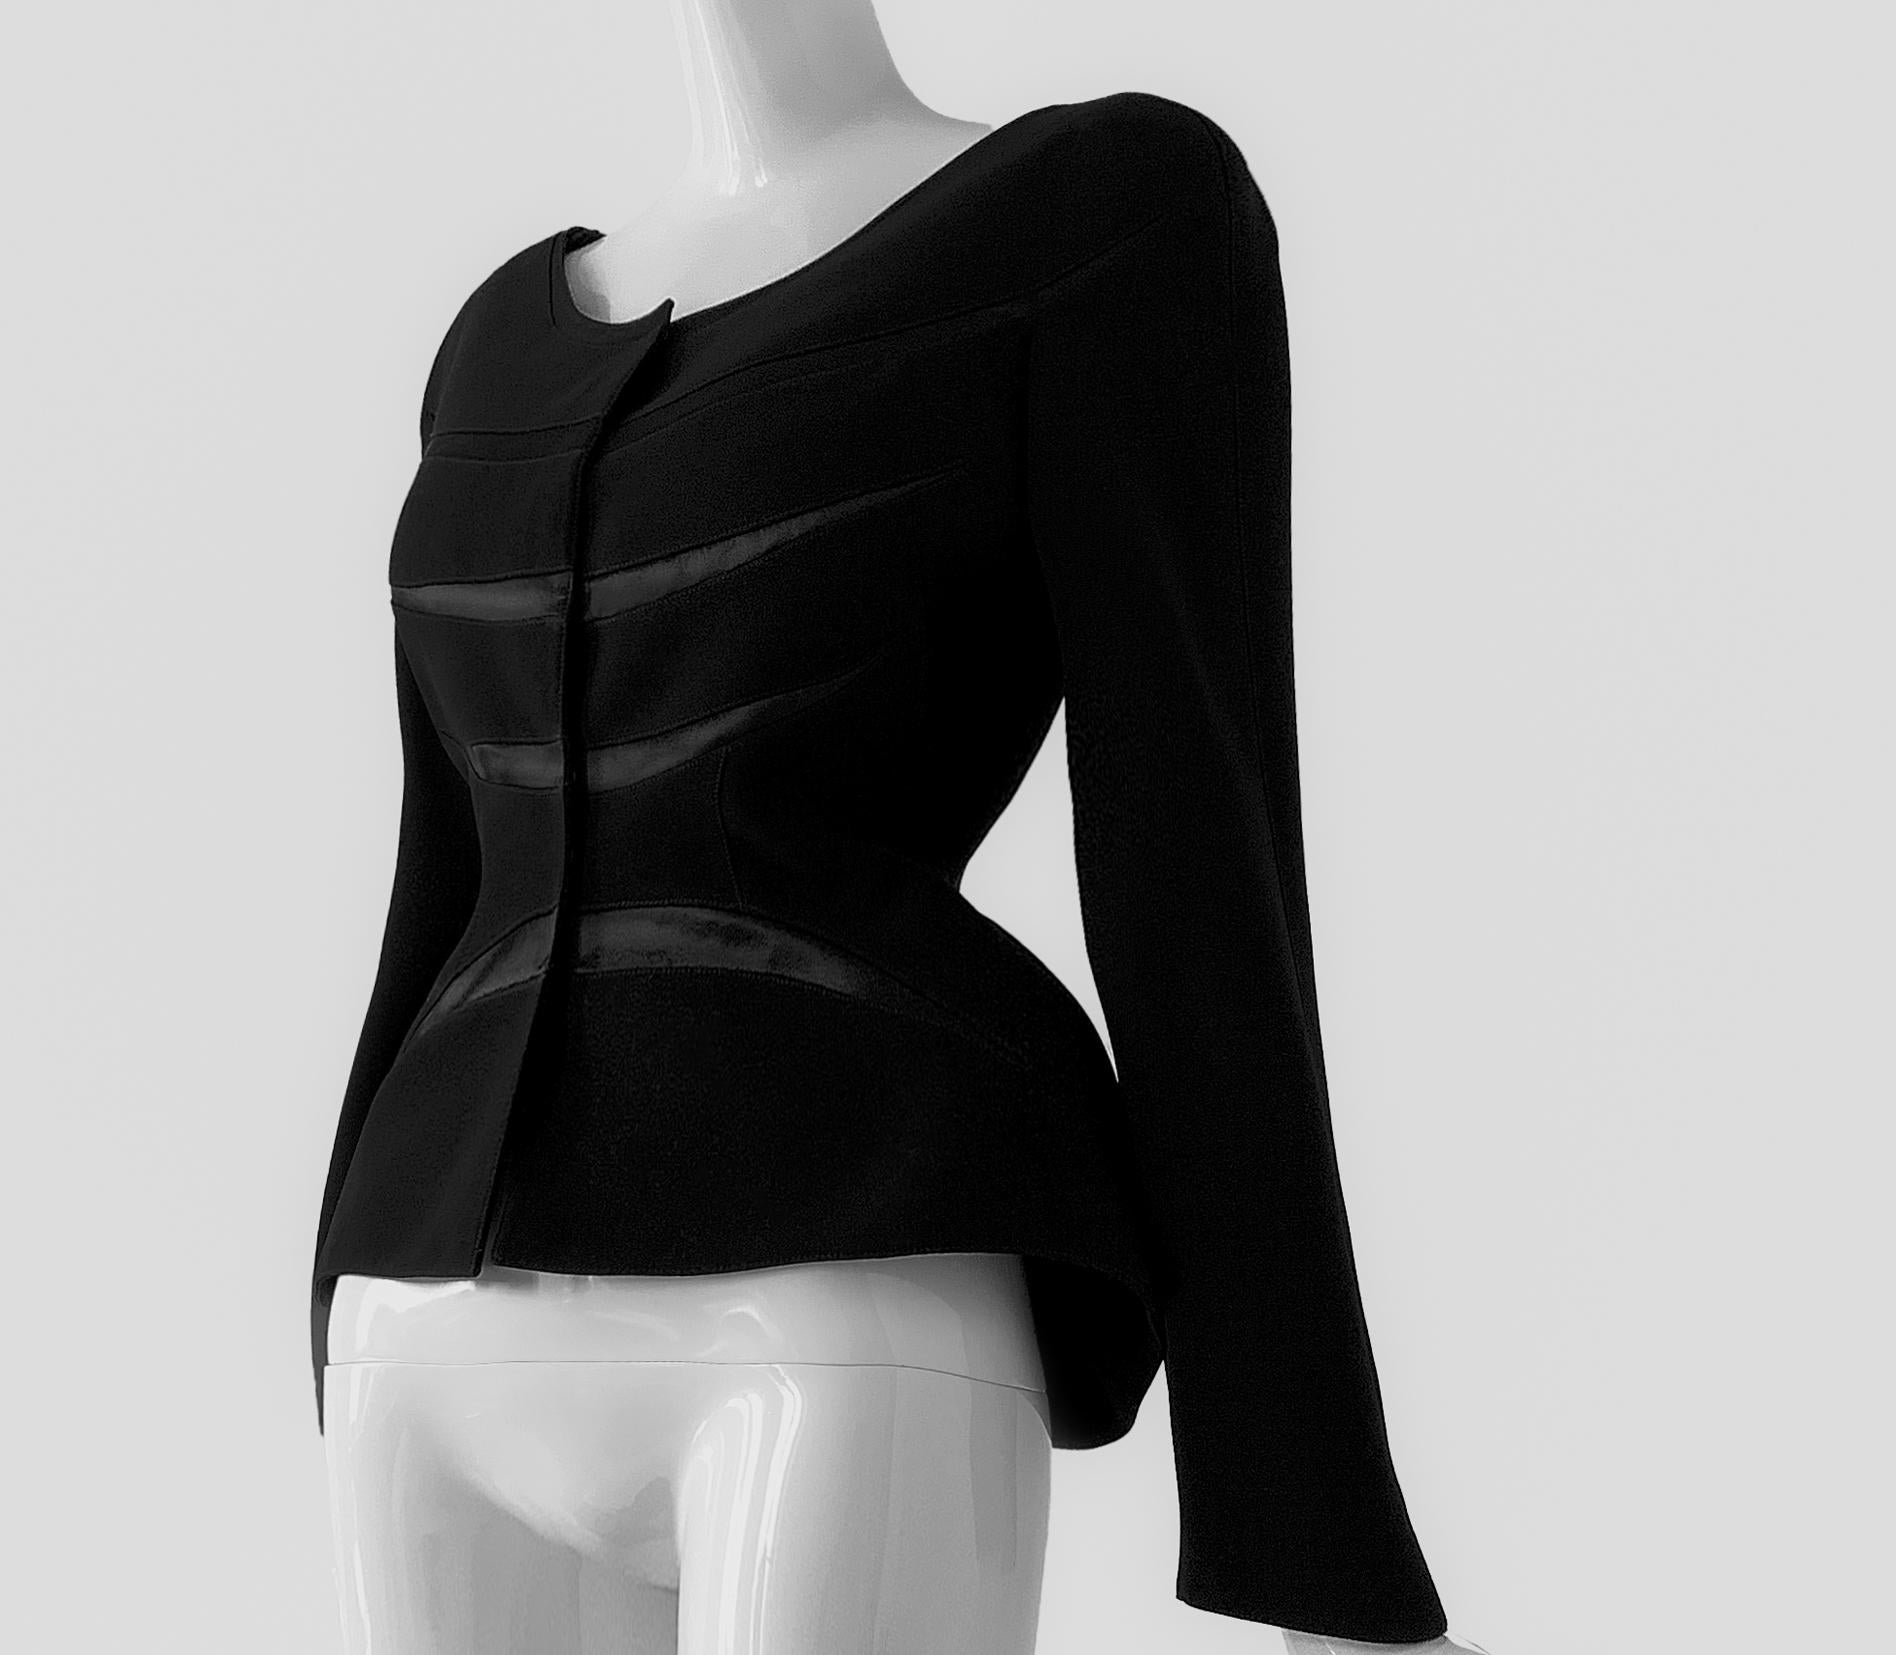 Thierry Mugler SS 2000 Black Jacket Blazer Fitted Fabulous  In Excellent Condition For Sale In Berlin, BE